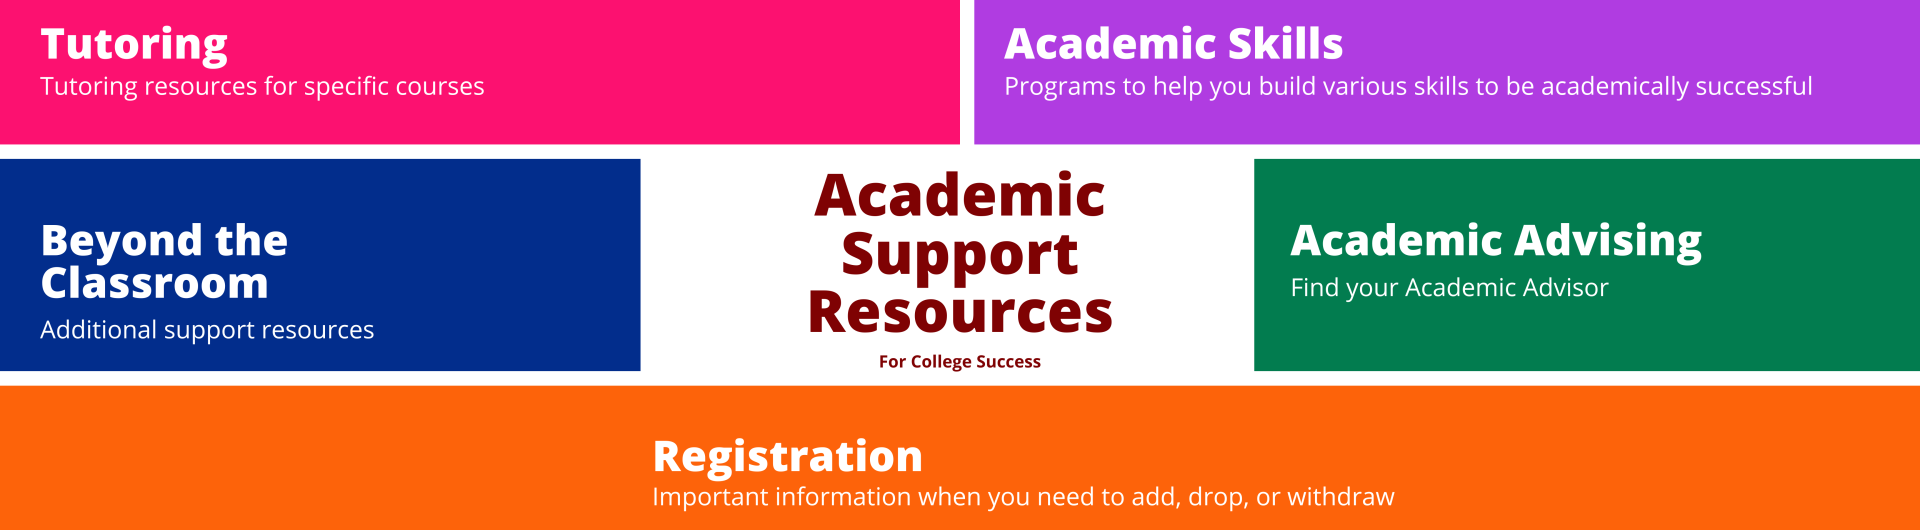 Academic Support Resources